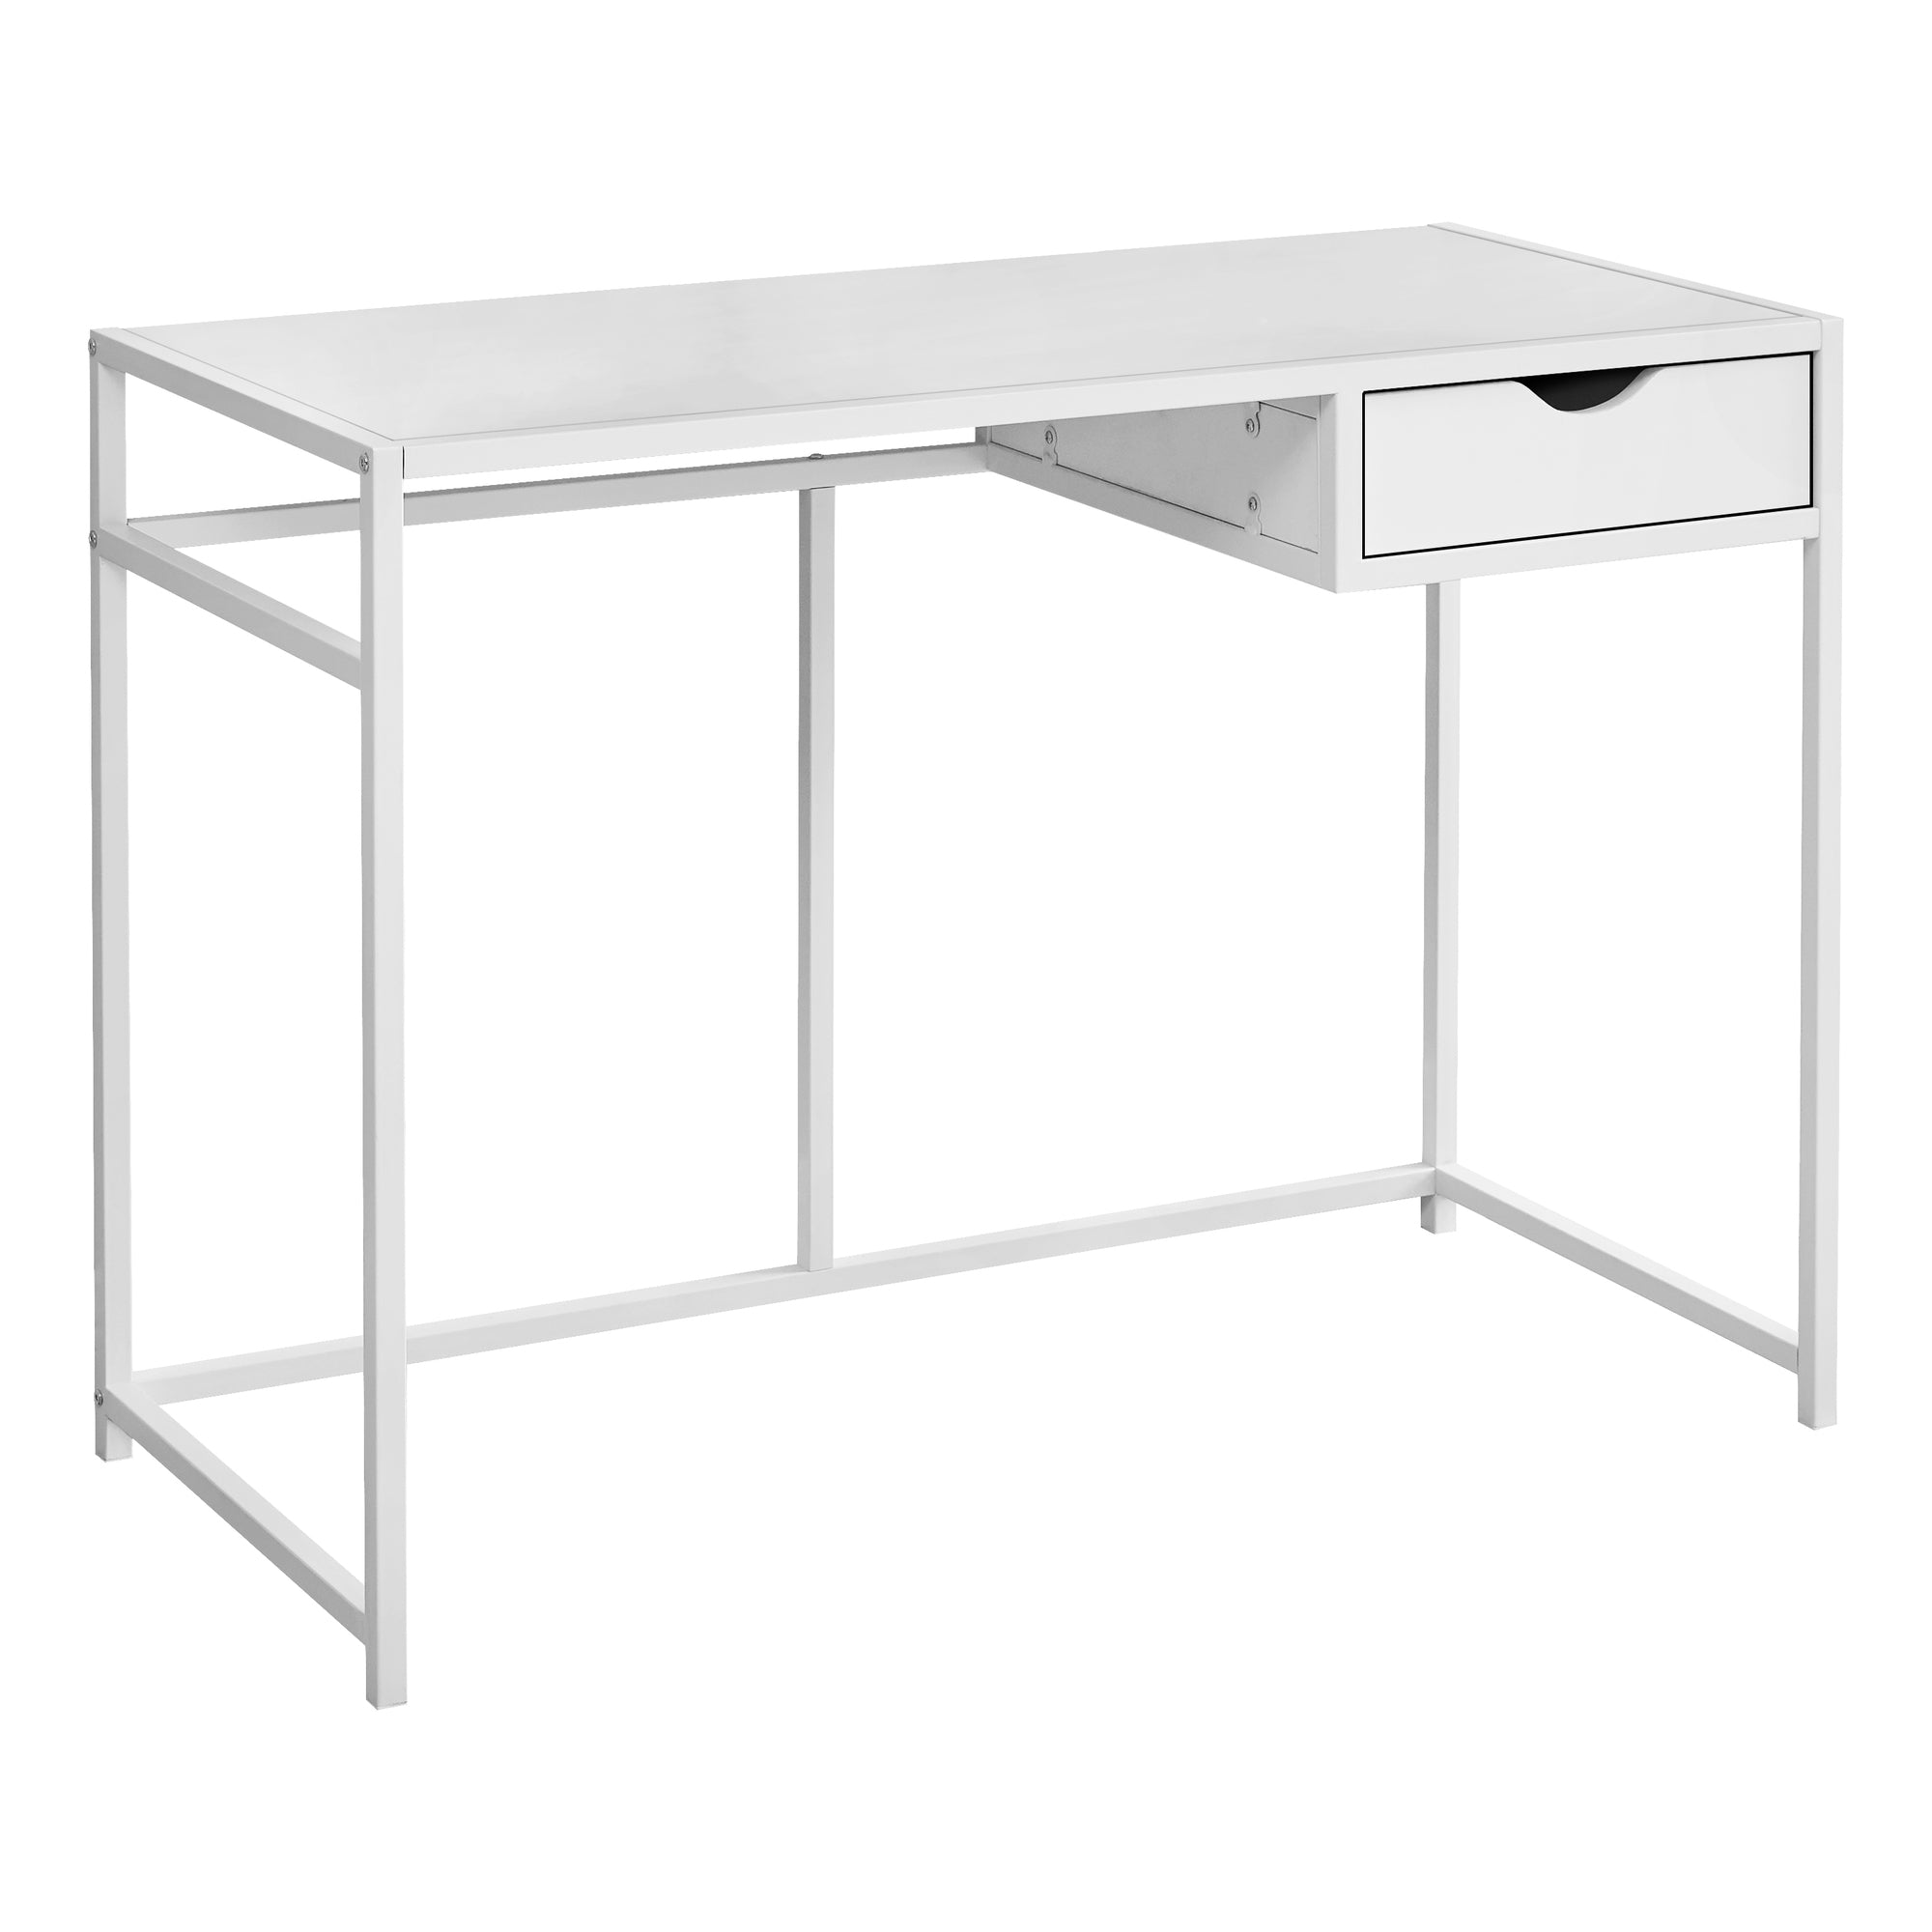 MN-927570    Computer Desk, Home Office, Laptop, Storage Drawers, 42"L, Metal, Laminate, White, Contemporary, Industrial, Modern